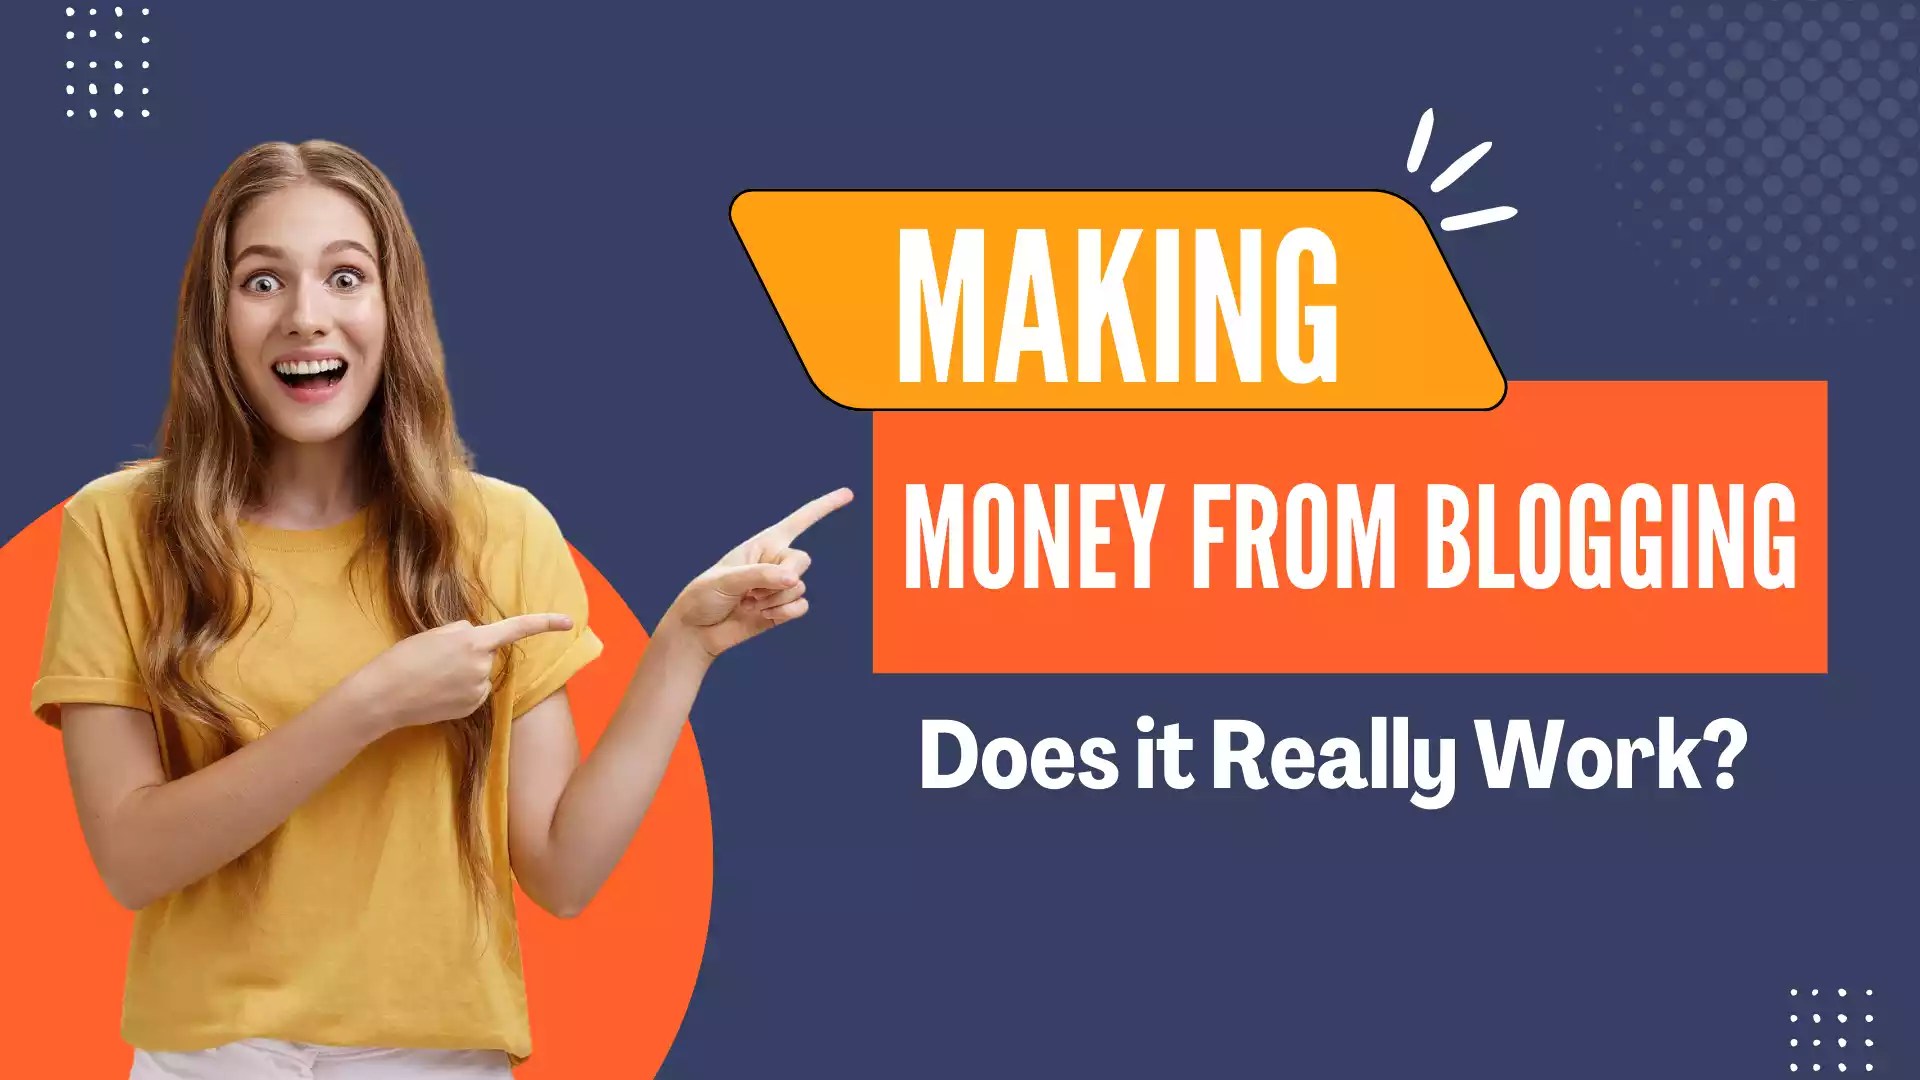 How To Make Money Blogging For Beginners